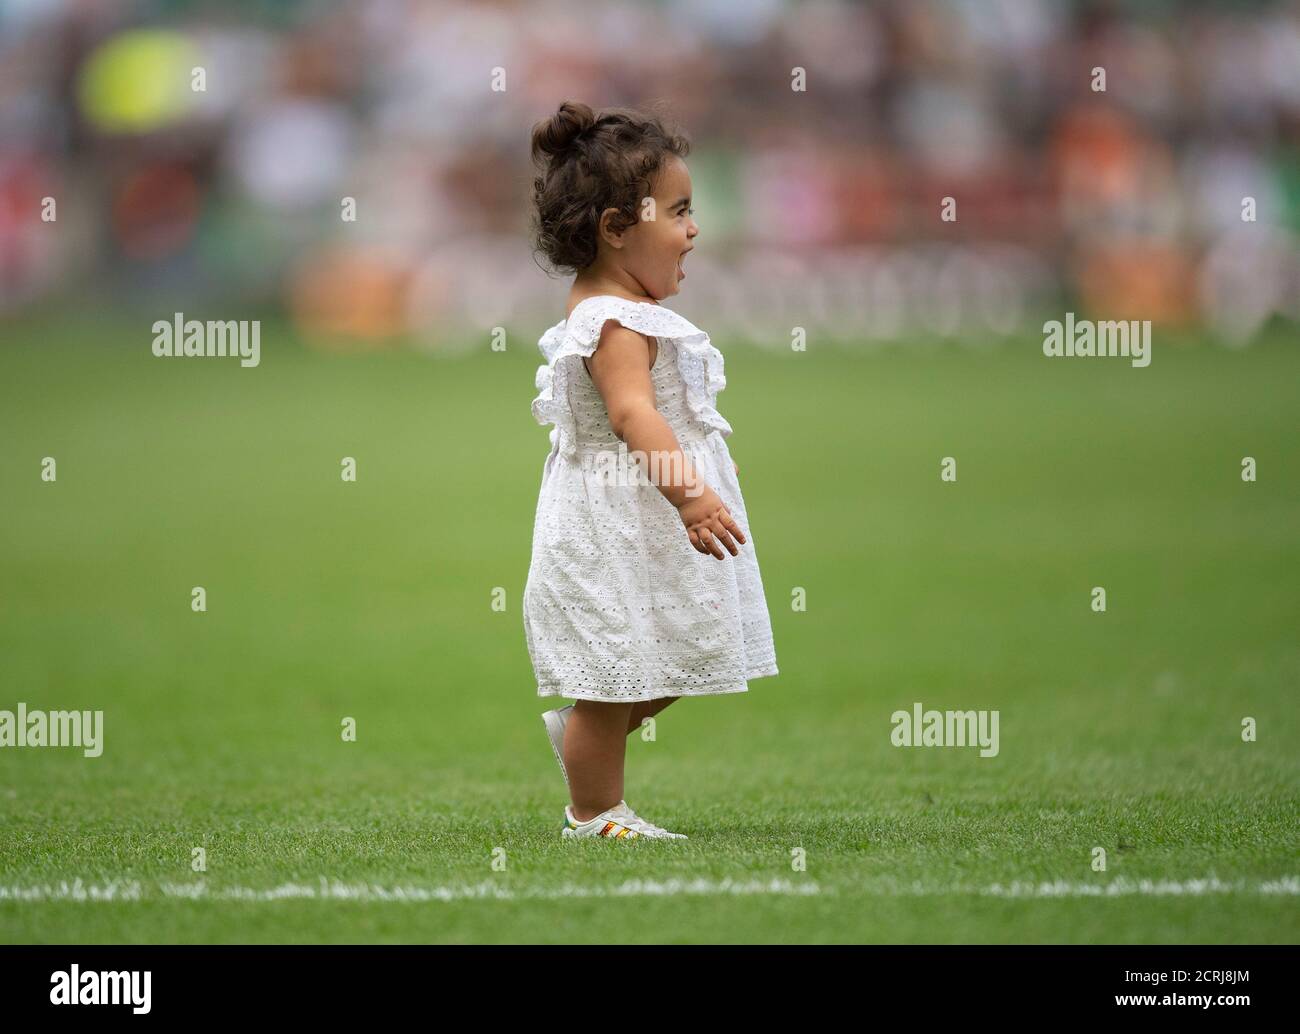 England's Manu Tuilagi's daughter.            PICTURE :  © MARK PAIN / ALAMY STOCK PHOTO Stock Photo